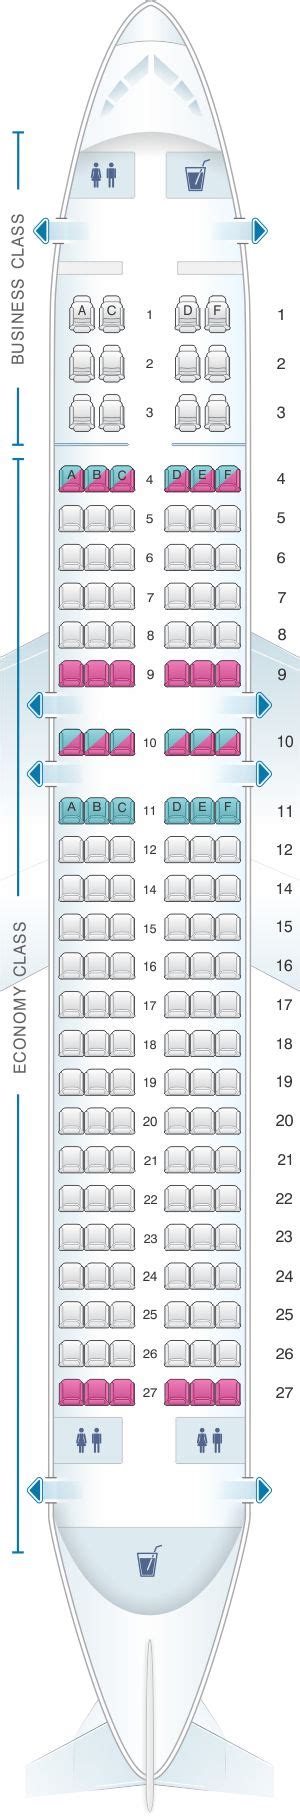 Seat Map Avianca Airbus A320 Air Transat Malaysia Airlines China